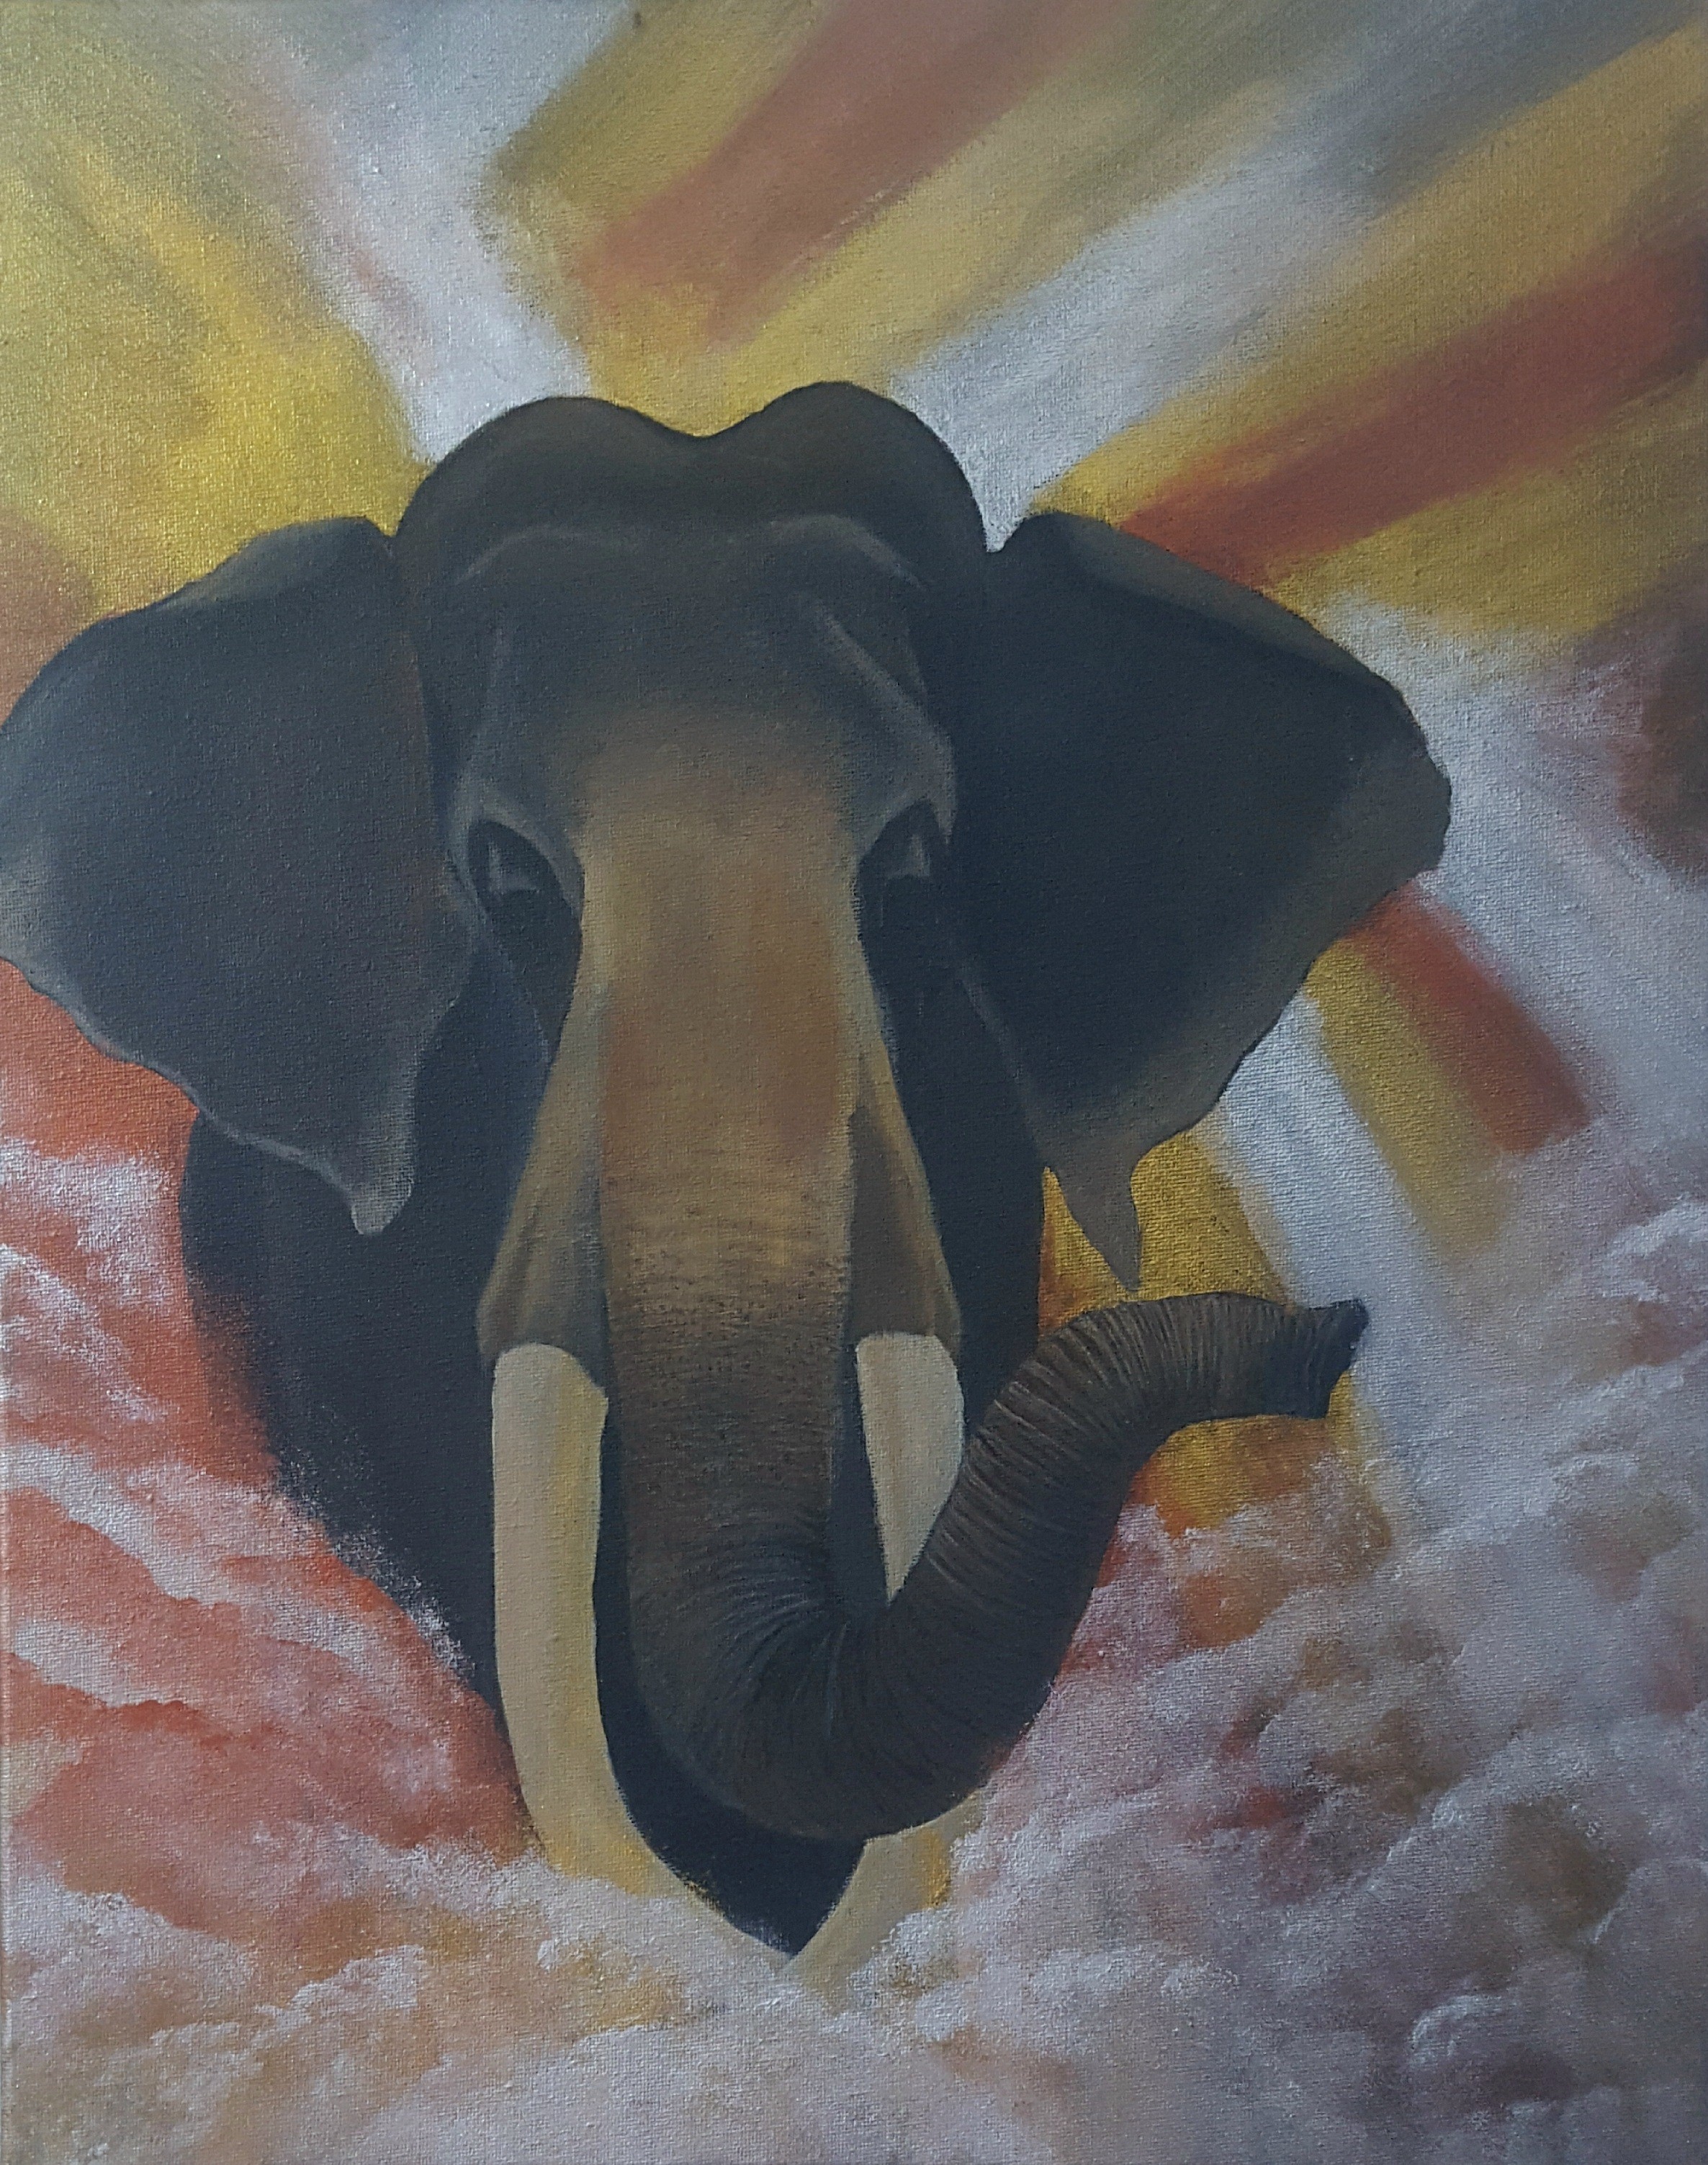 Tusker on Cloud by A. A. S. Dilhani